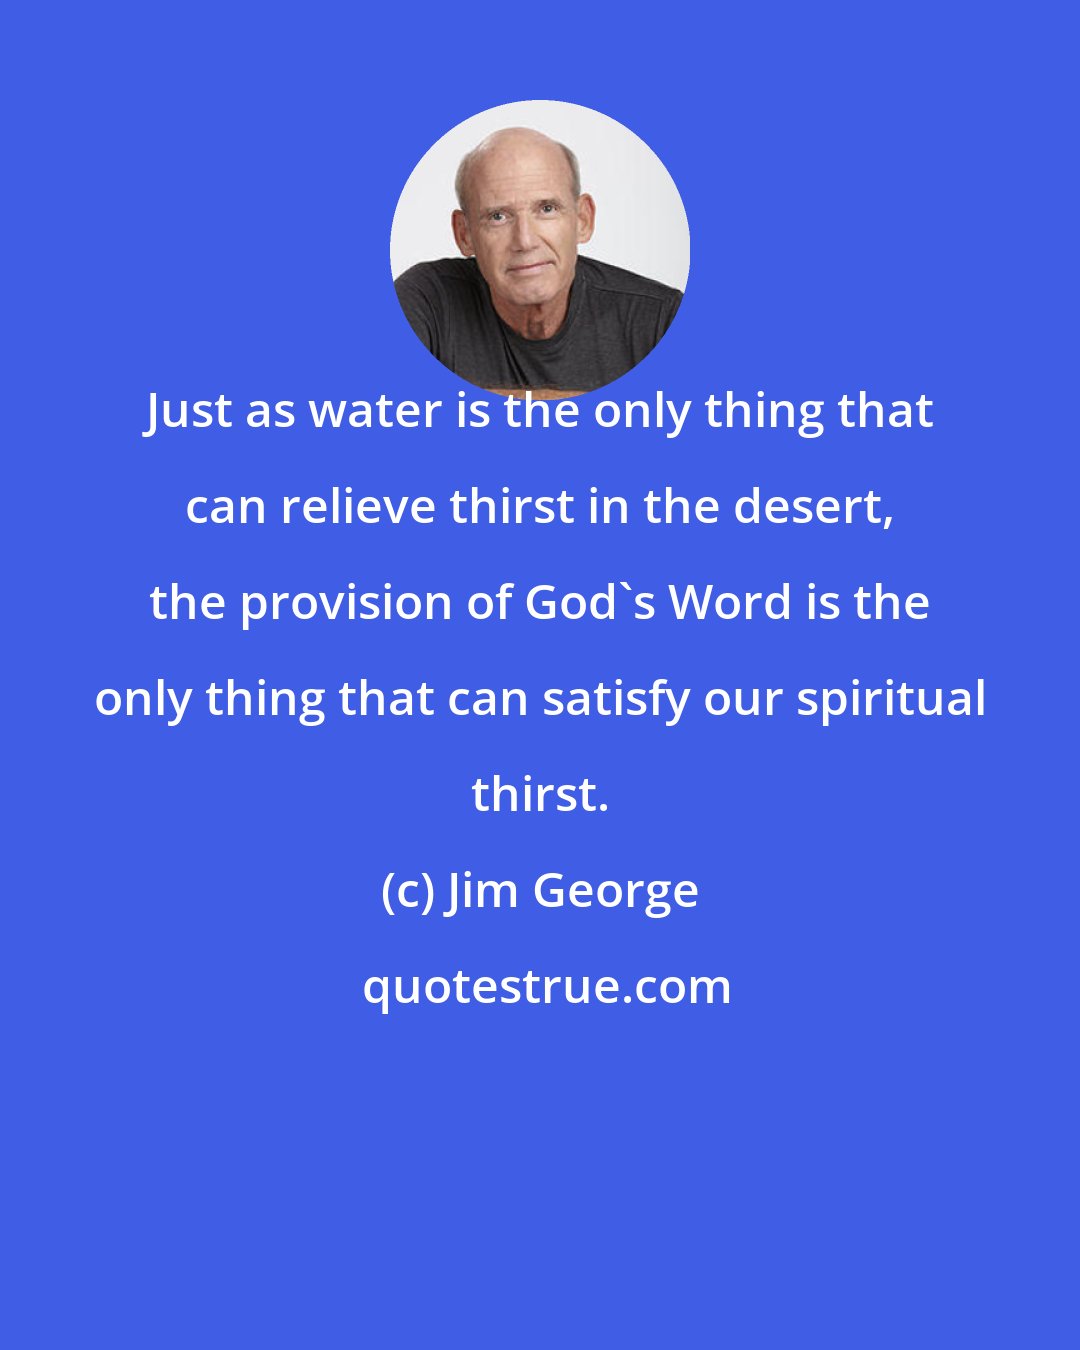 Jim George: Just as water is the only thing that can relieve thirst in the desert, the provision of God's Word is the only thing that can satisfy our spiritual thirst.